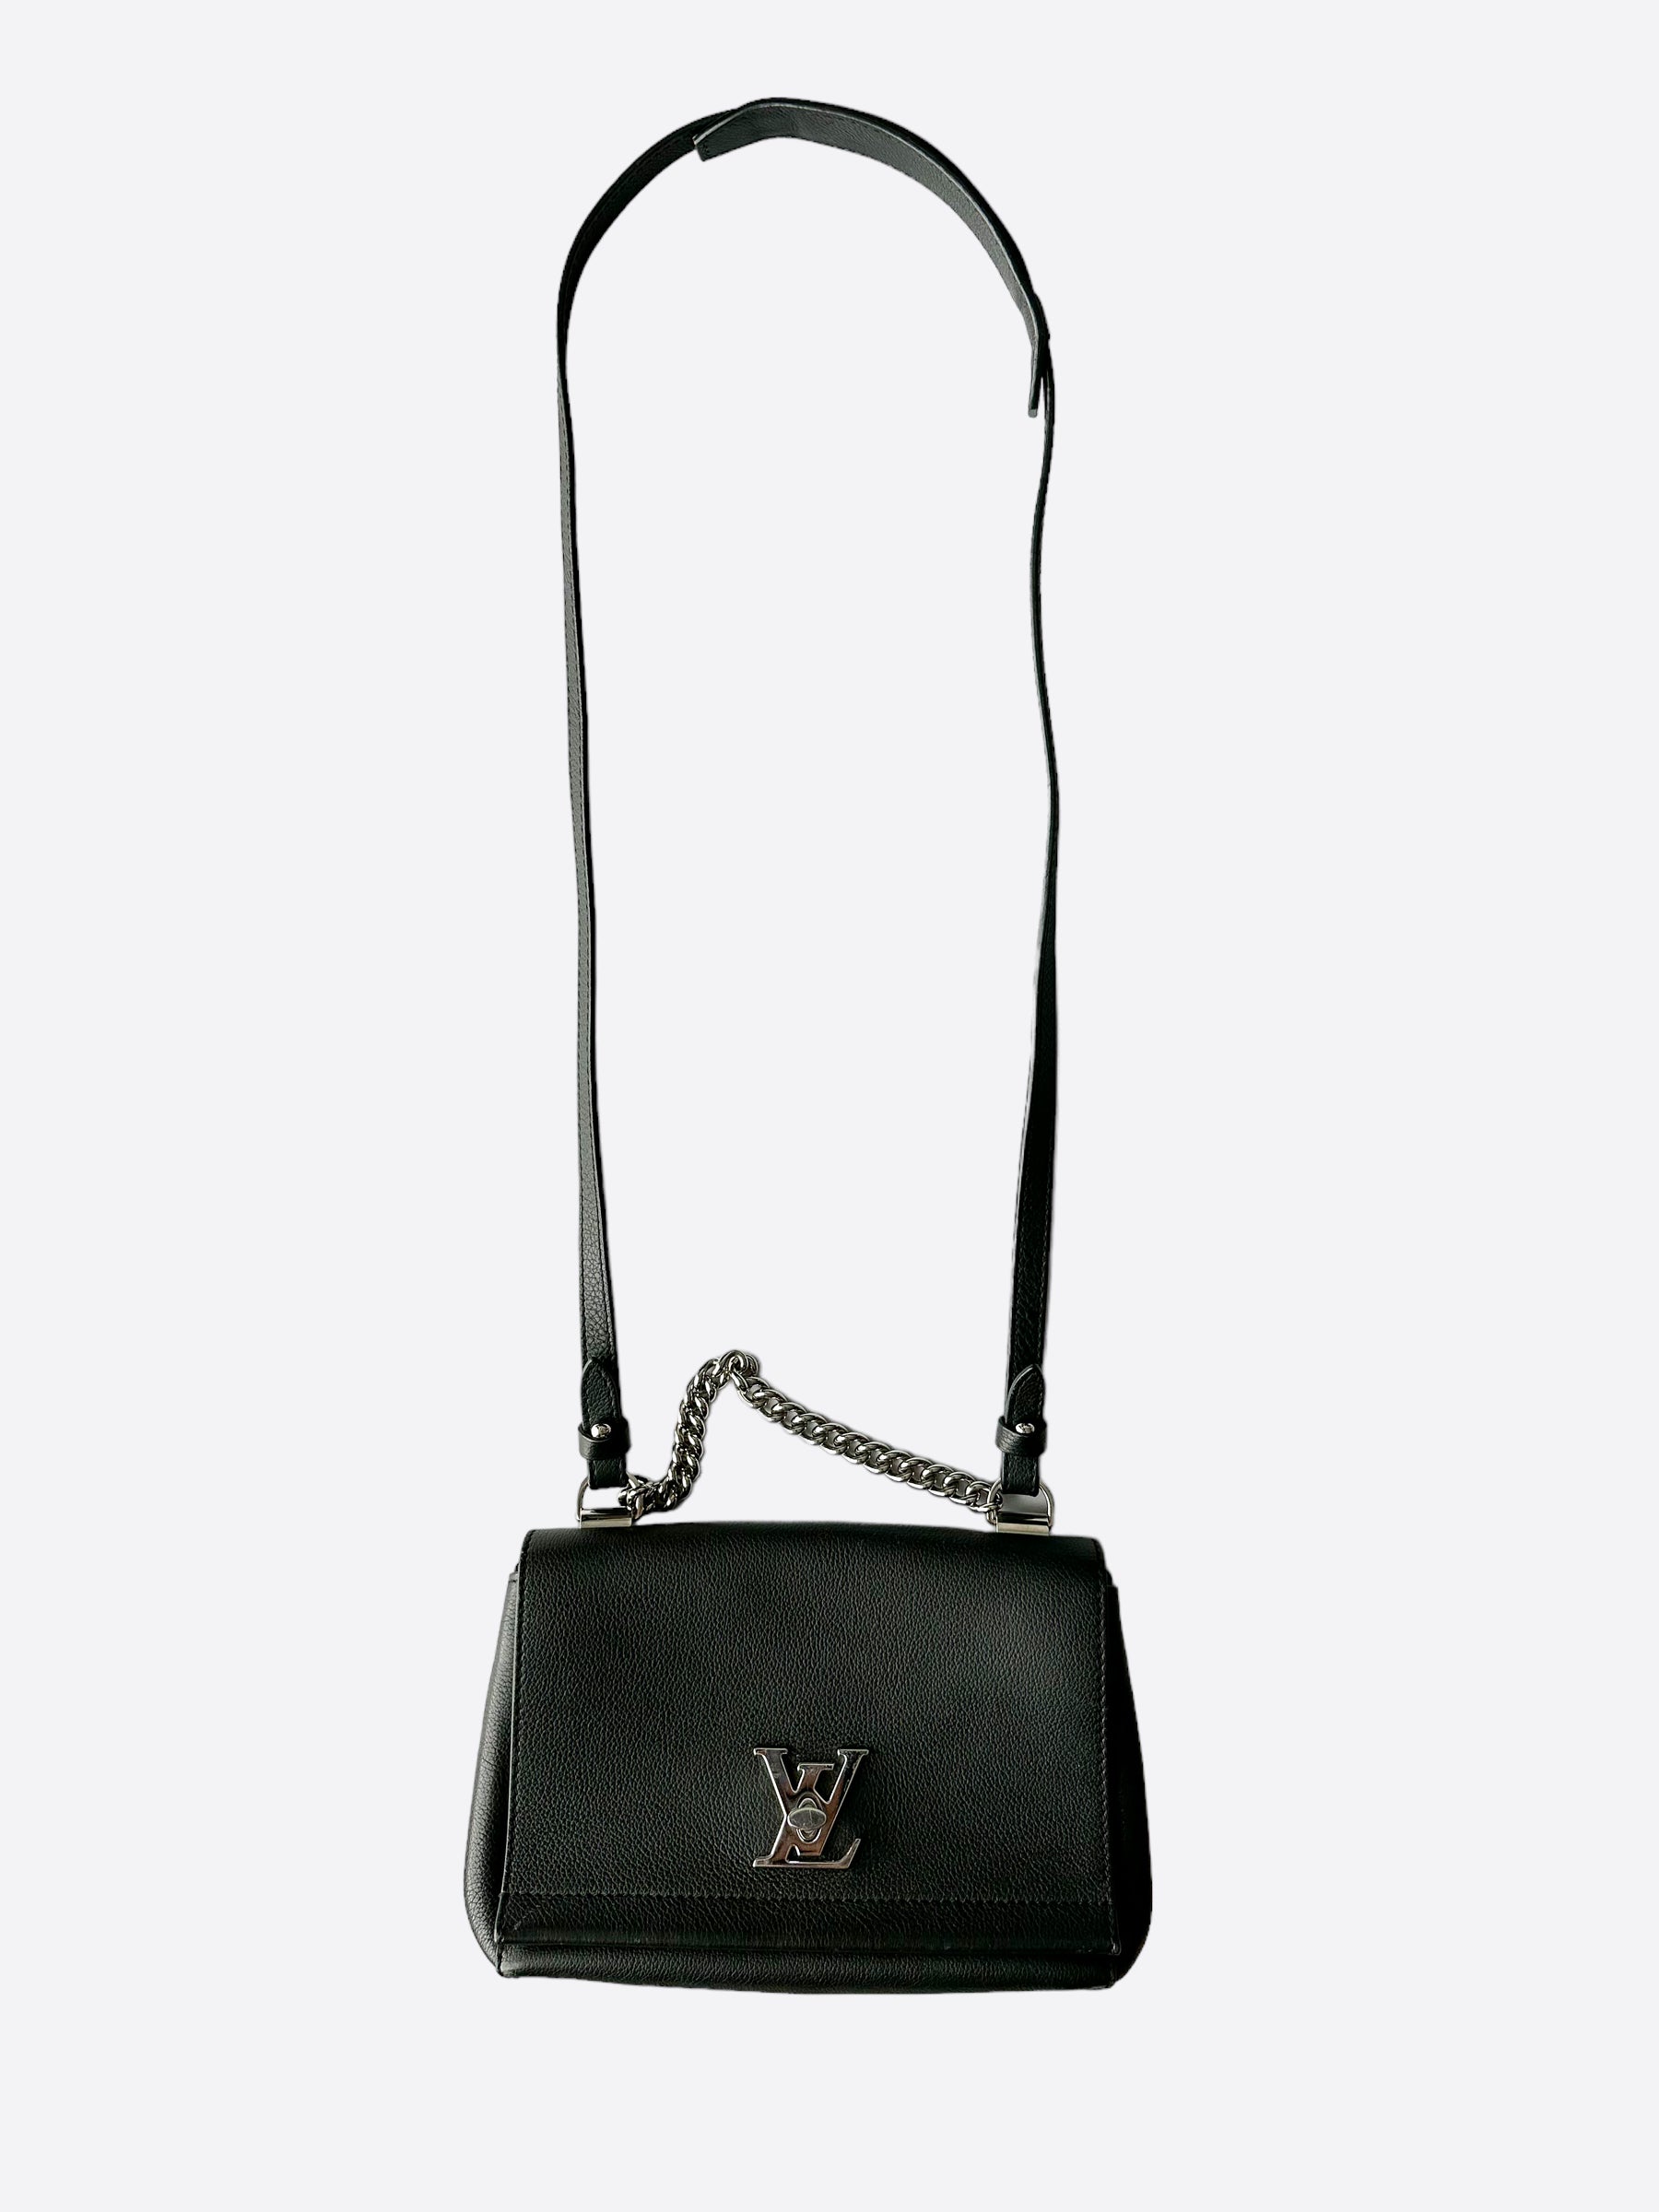 Has anyone purchased this LV lockme tender bag? Looking for best